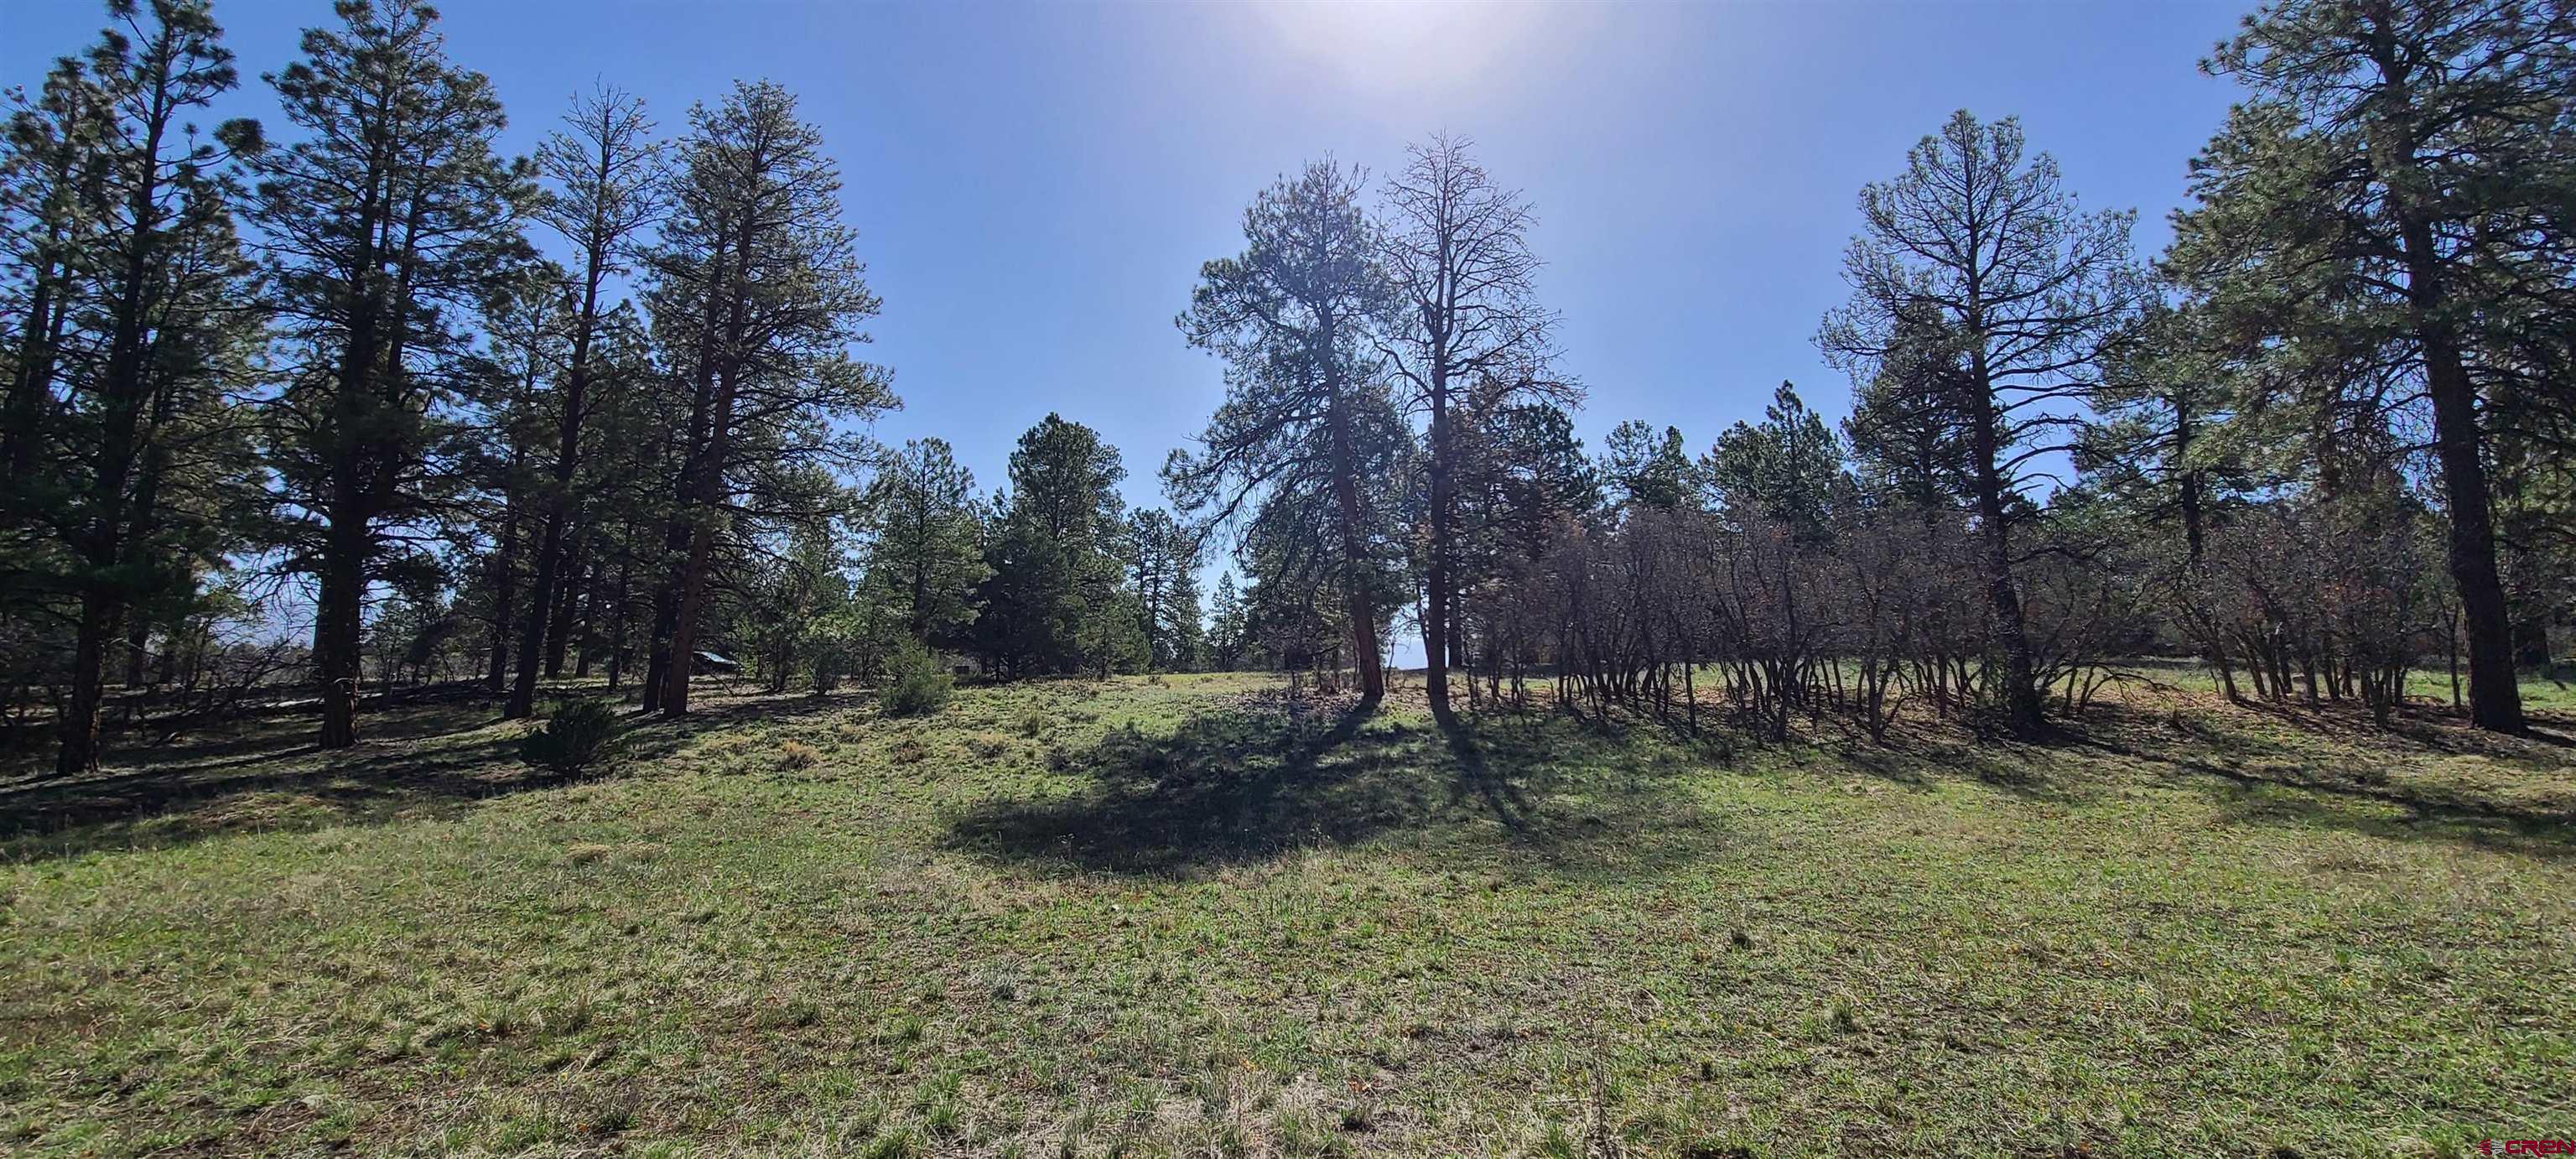 Build your dream house in the pristine golf course community of Fairway Pines! Just minutes from Ridgway and a short drive to skiing, hiking, four wheeling, fishing and hot springs. This easy to build on lot would be perfect for a walkout basement. Walking distance to the golf club and restaurant. Access the property on fully paved roads. Fiber internet to the lot line and a paid water tap. Own your piece of beautiful Ouray County today!